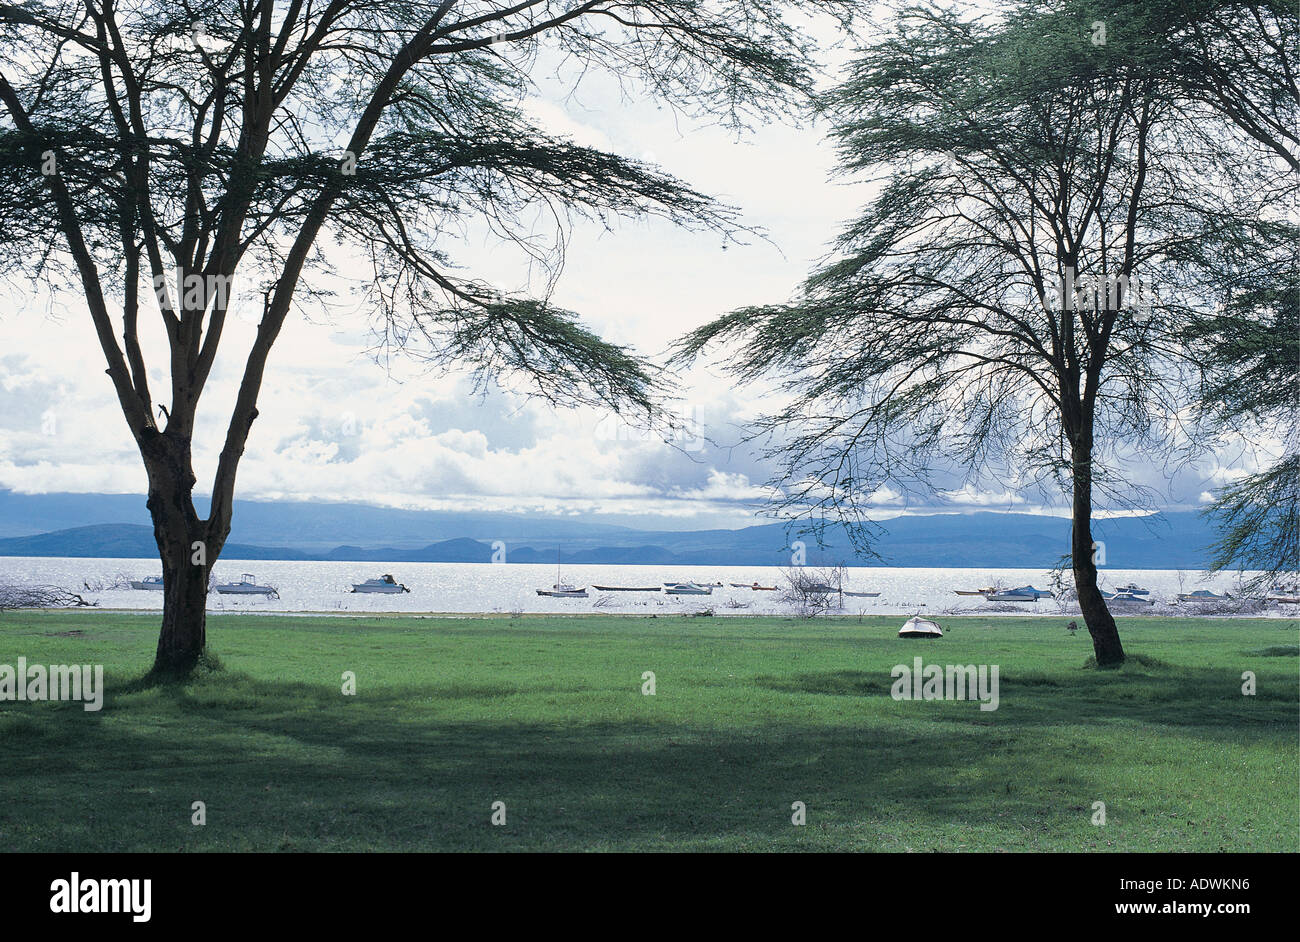 Open green grass lawns sloping down to the shore of Lake Naivasha in the Great Rift Valley Kenya East Africa Stock Photo